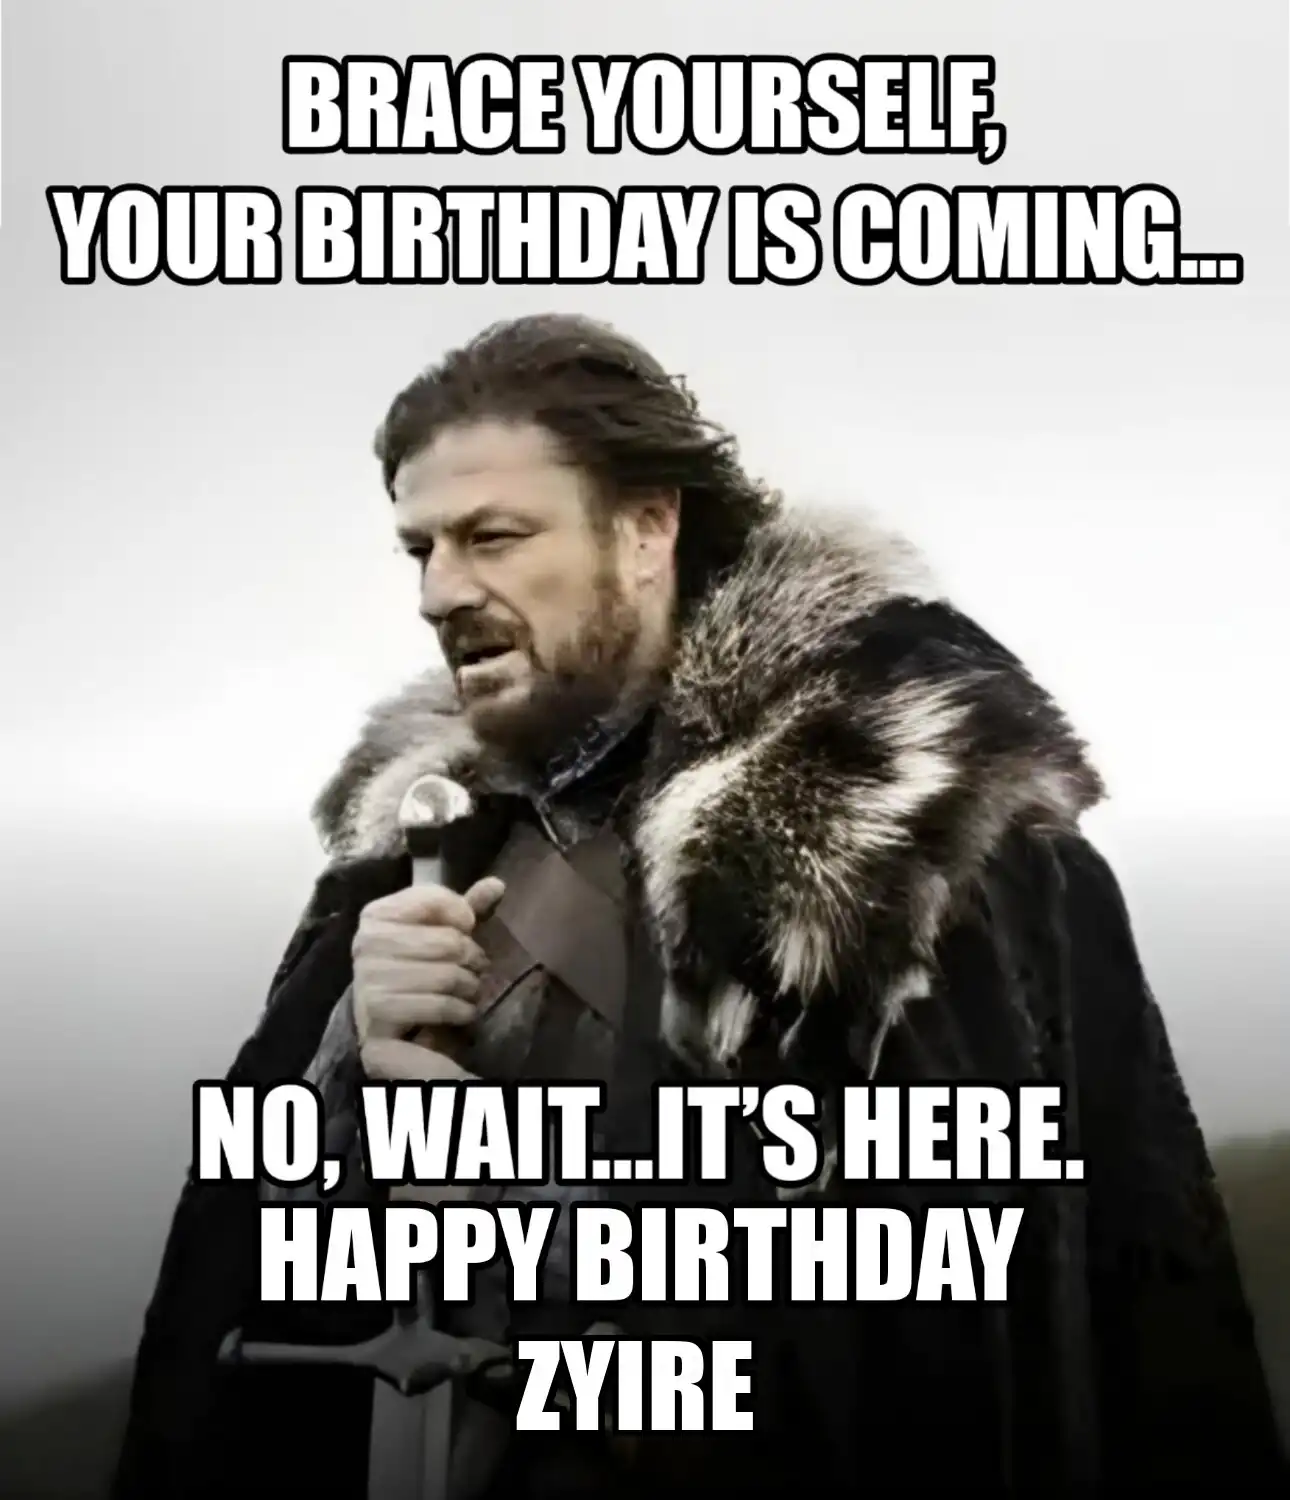 Happy Birthday Zyire Brace Yourself Your Birthday Is Coming Meme